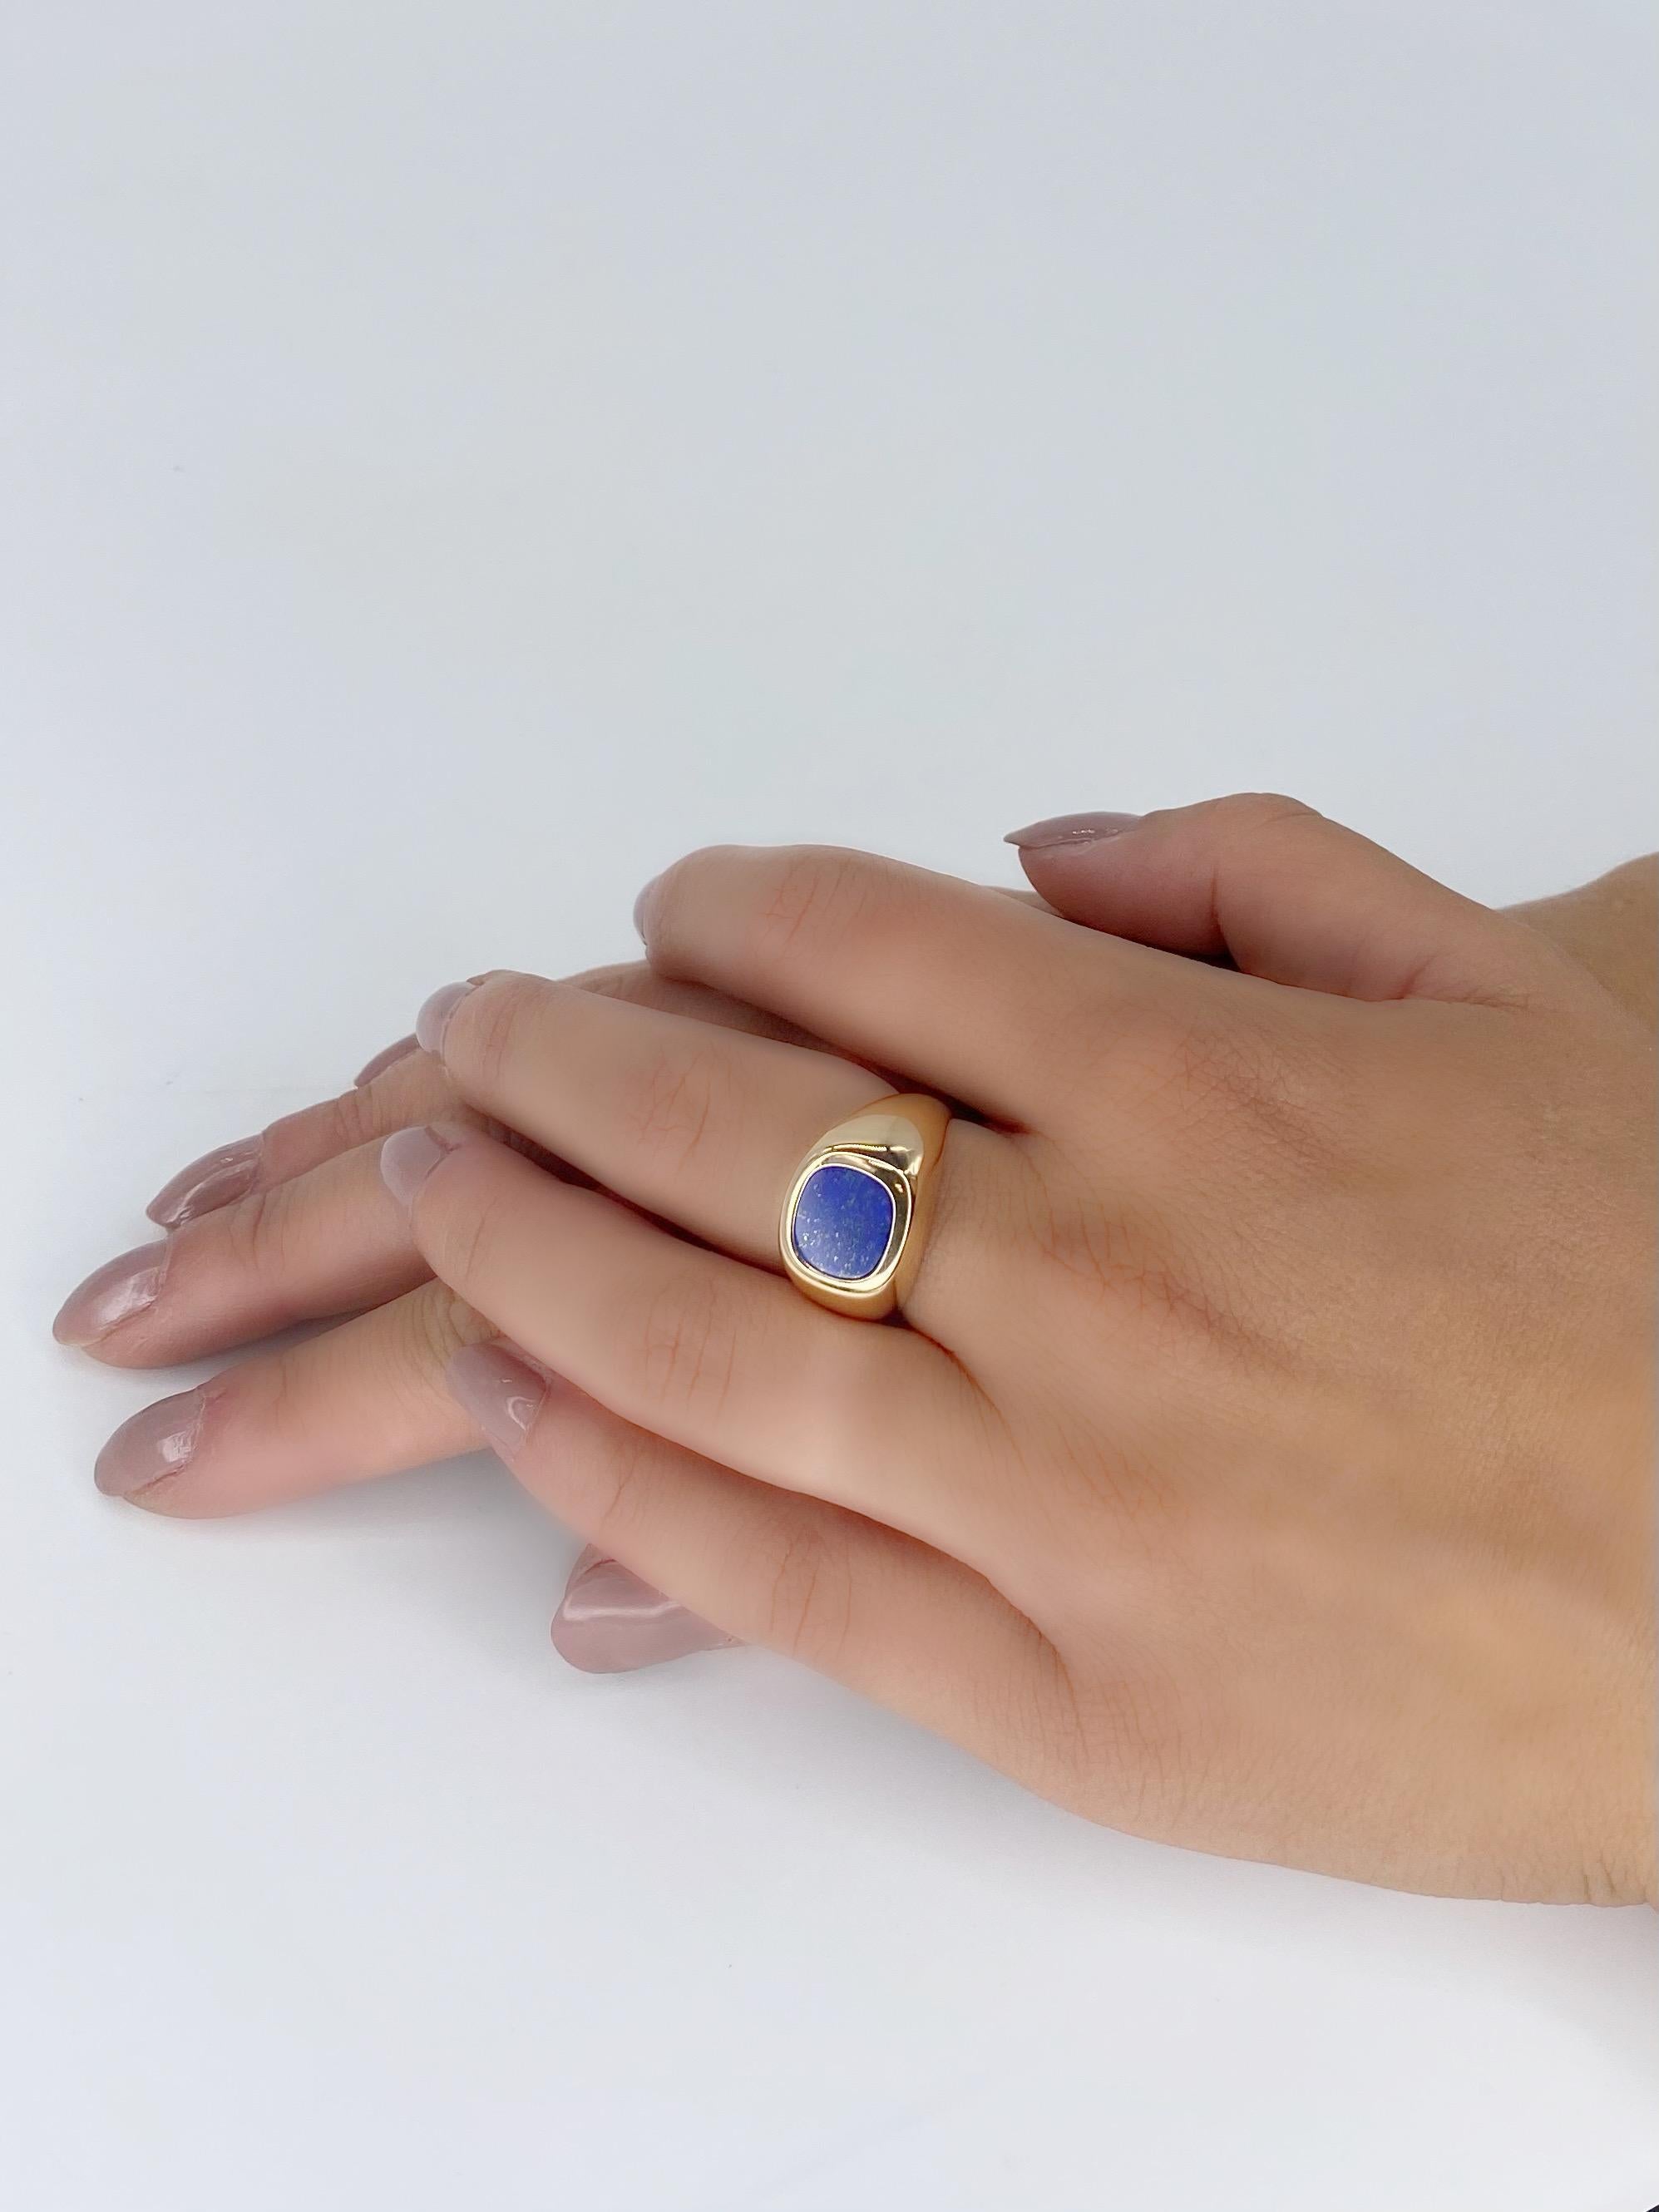 Ring Chevalière Yellow Gold 18 carats and Lapis Lazuli

Ring style signet ring with a lapis lazulis cushion cut. Lapis Lazulis plate that can be engraved

Lapis Lazulis width : 0,85 cm 
Lapis Lazulis length: 0.9 cm 
Size: 53 FR, 6,5 US , M UK